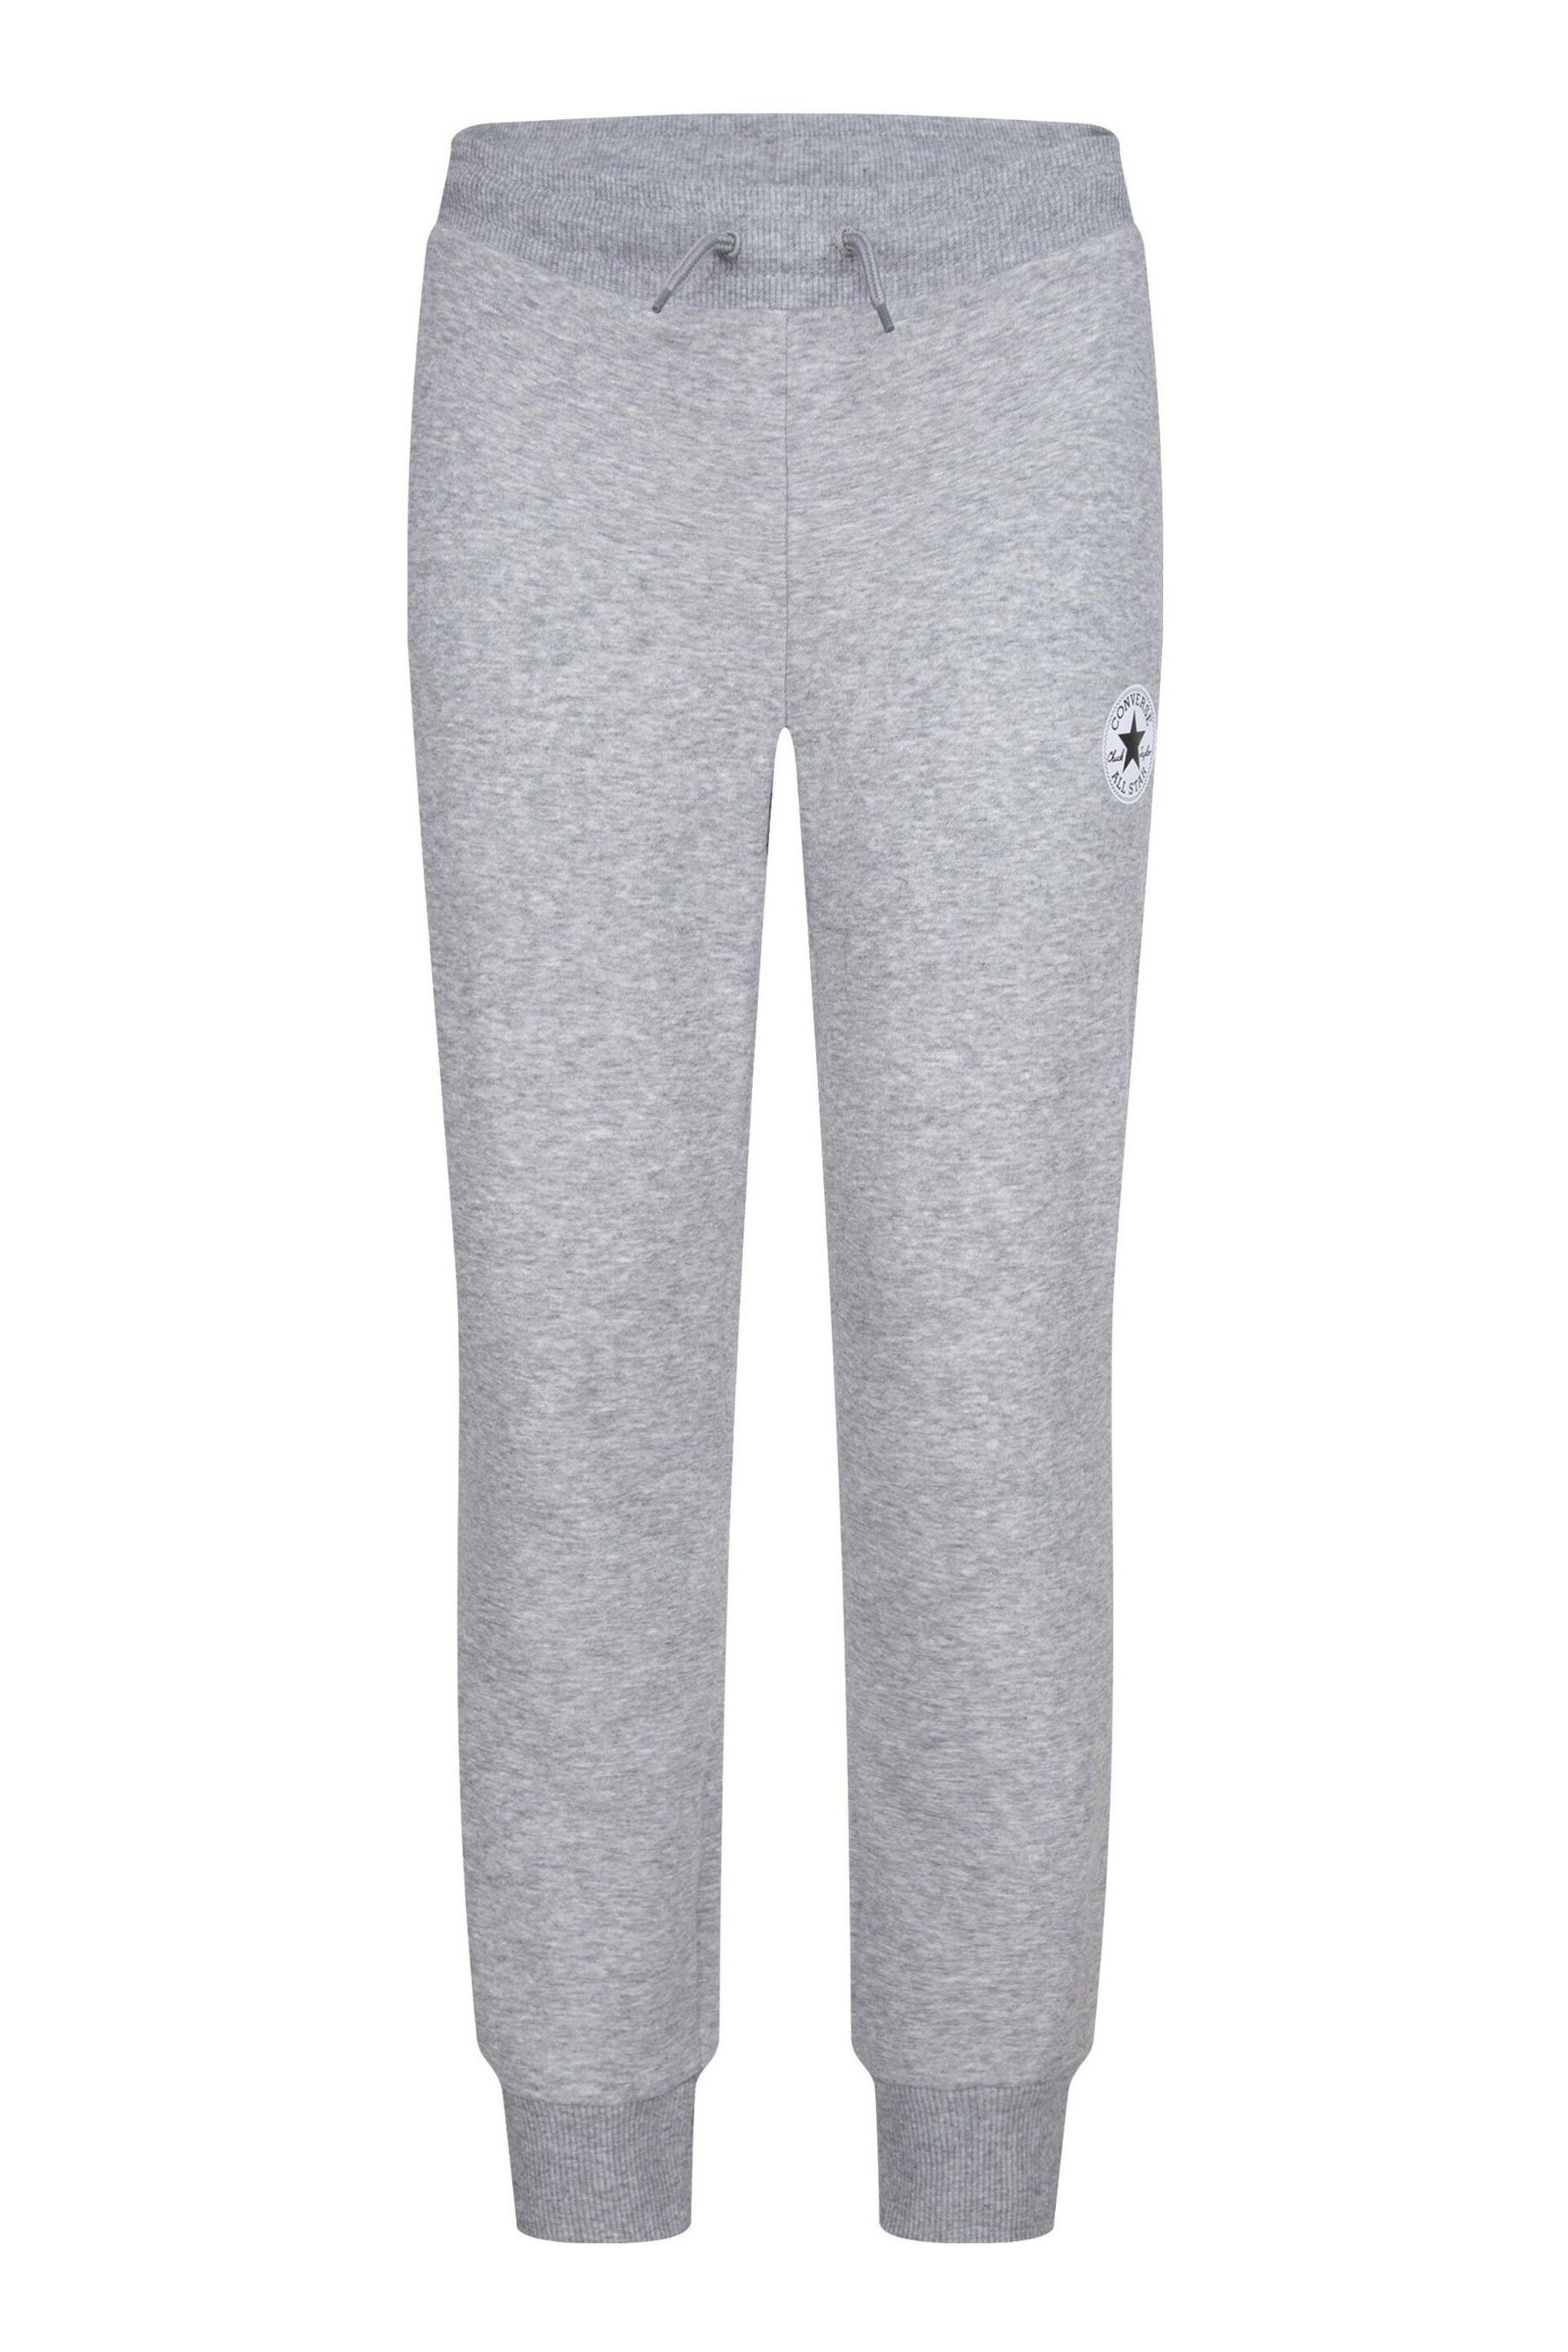 Converse Grey Signature Chuck Patch Joggers - Image 6 of 7